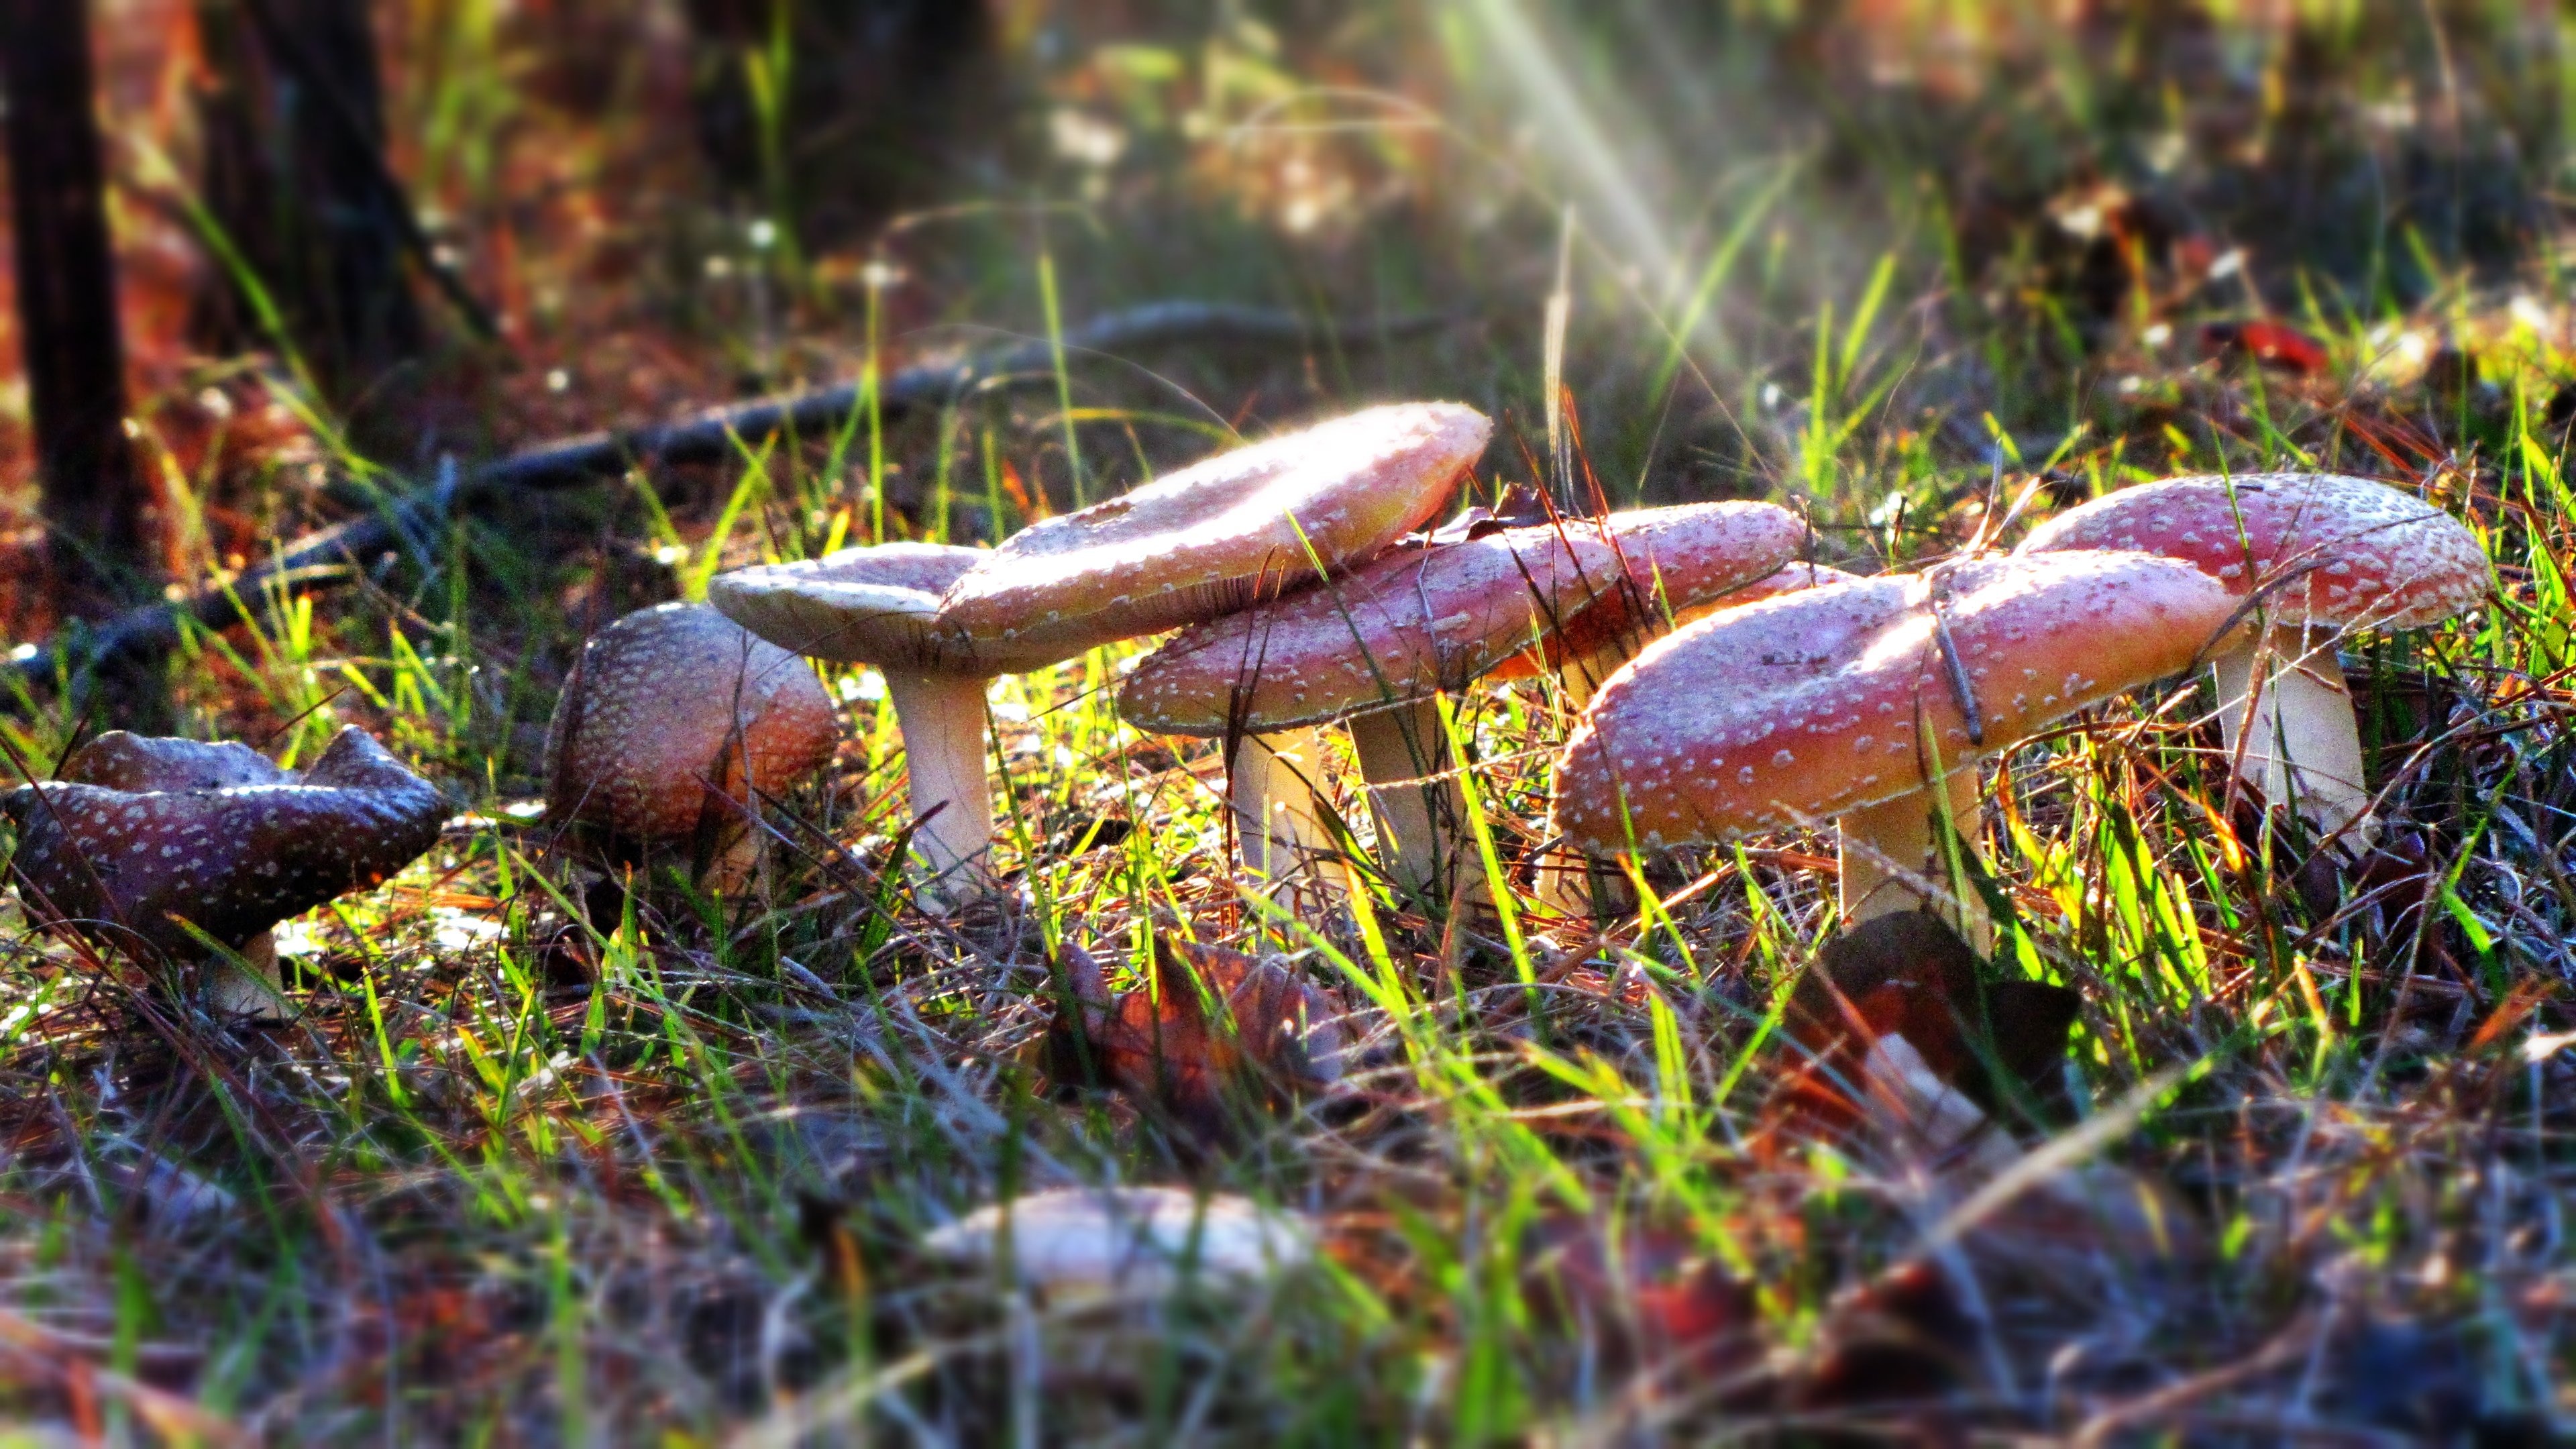 person taking photo of mushrooms in tilt shift photography